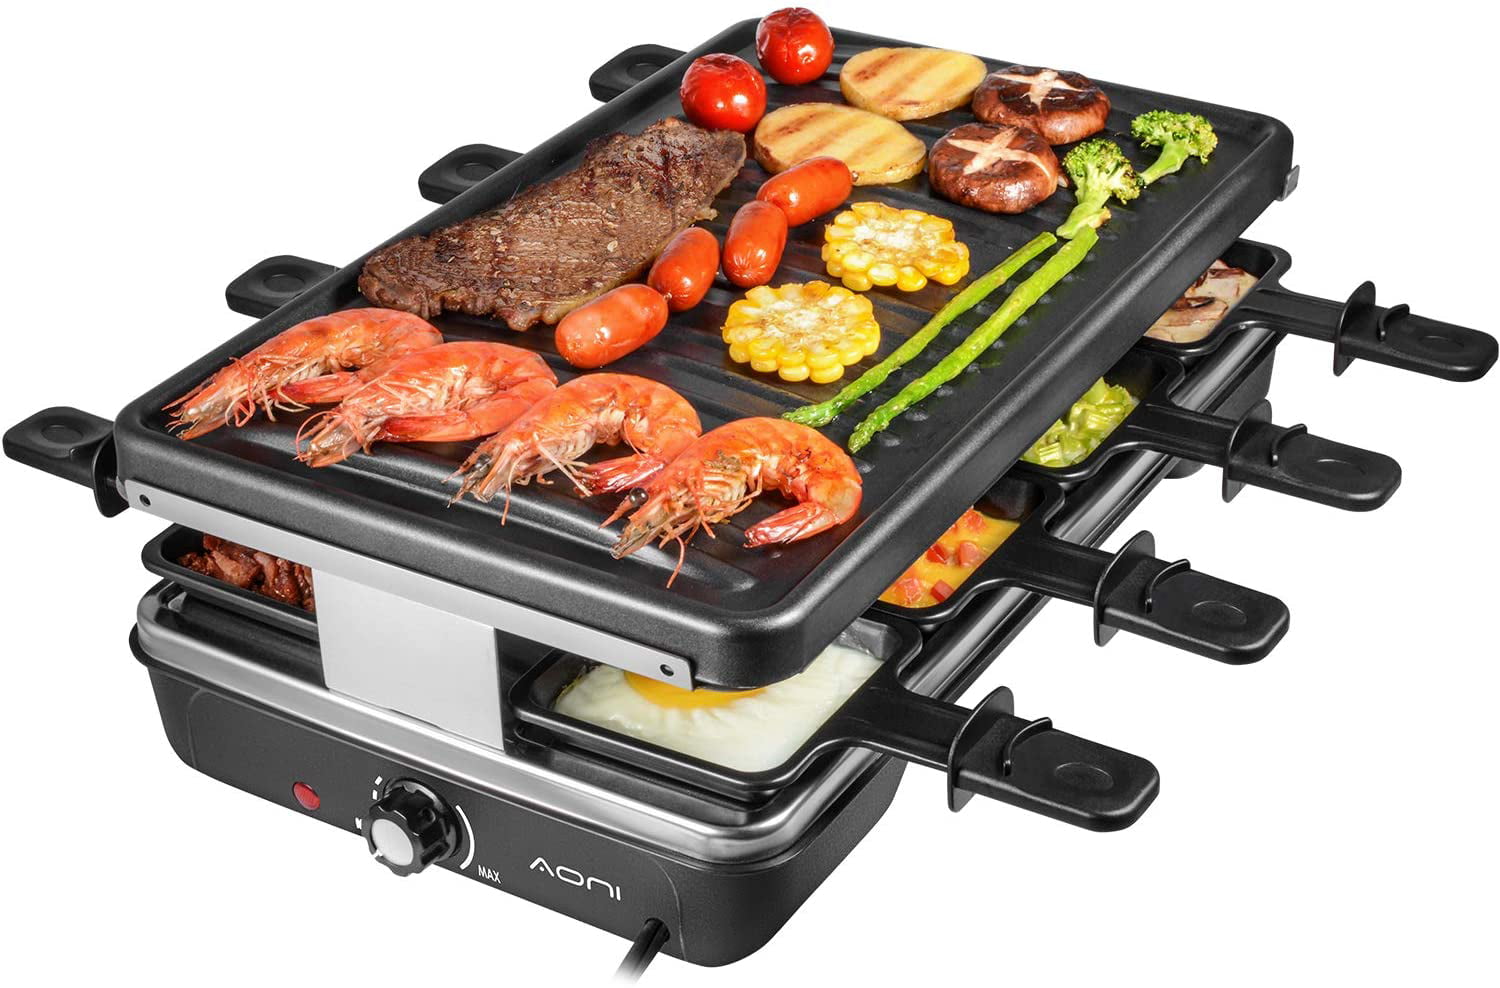 AONI Electric Grill Smokeless Party Grill Electric BBQ Grill with Non-Stick Grilling Surface, 1200W Temperature Control, Dishwasher Safe, Serve the whole family - Walmart.com